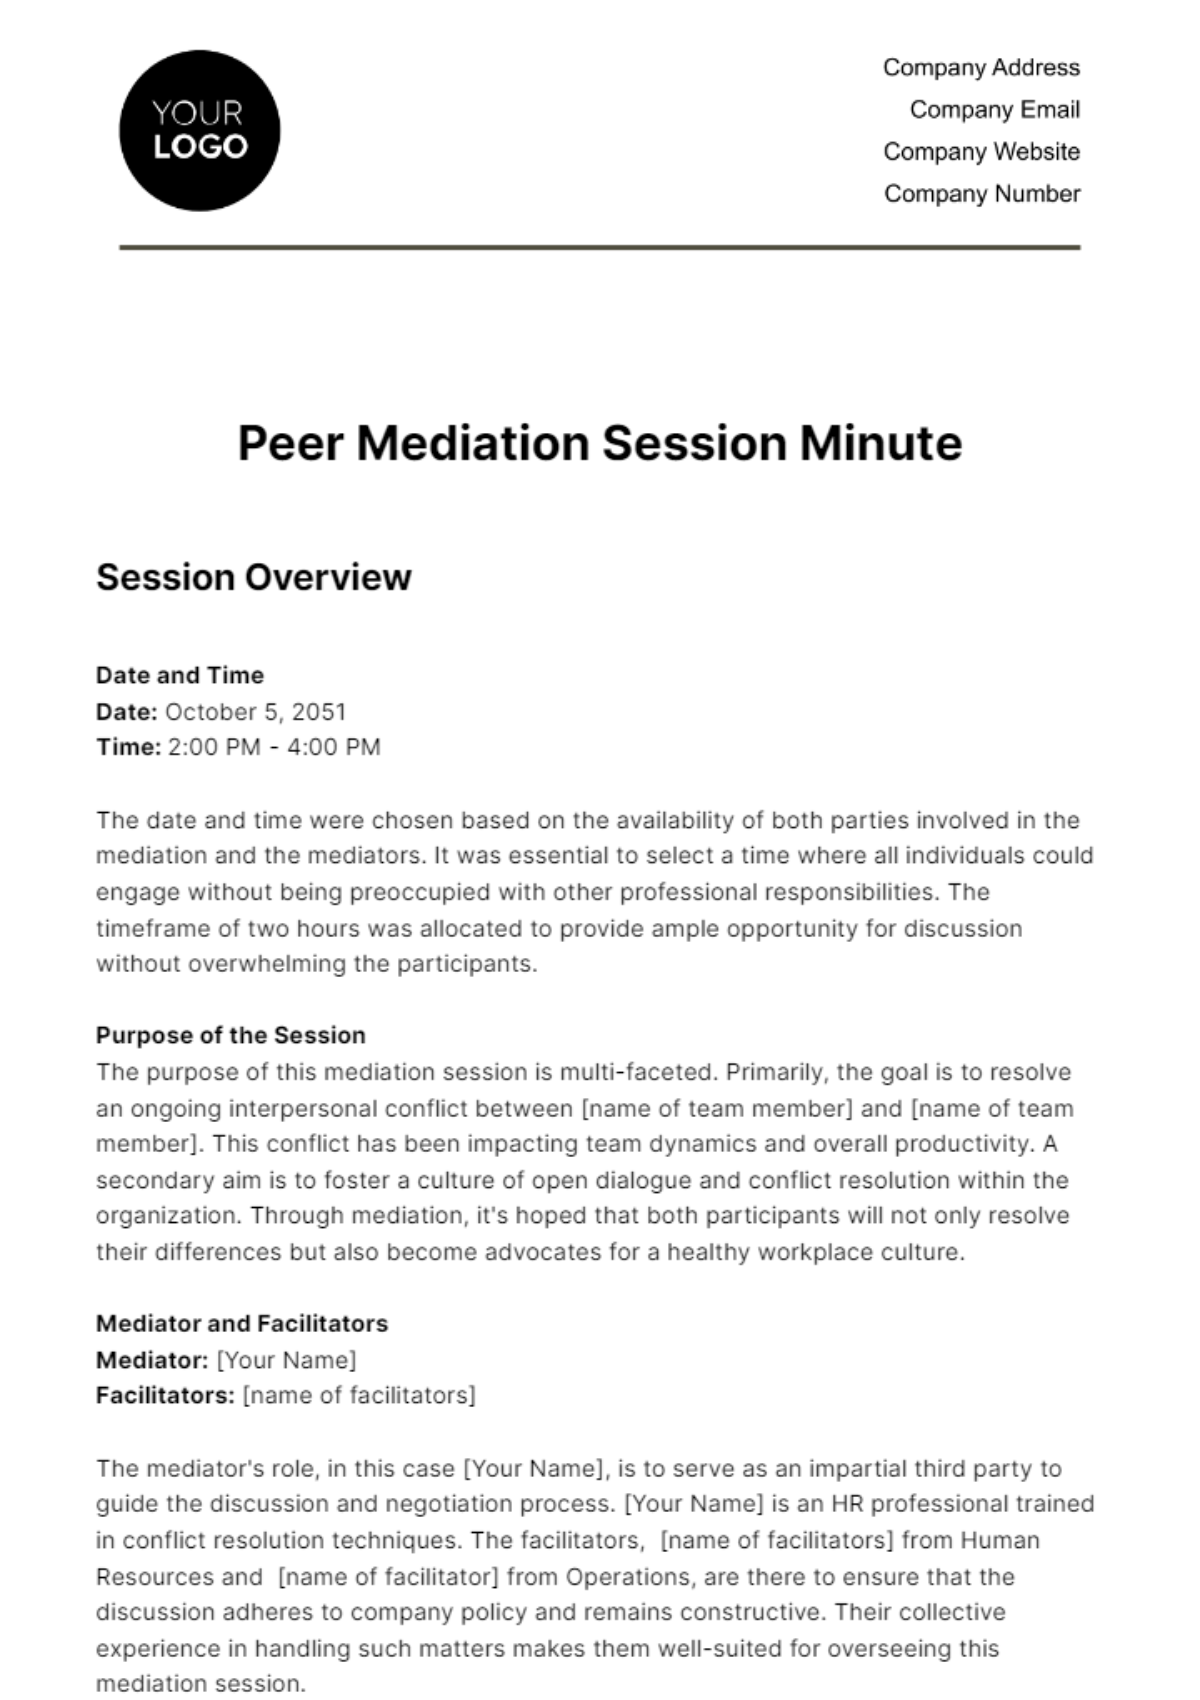 Free Peer Mediation Session Minute HR Template